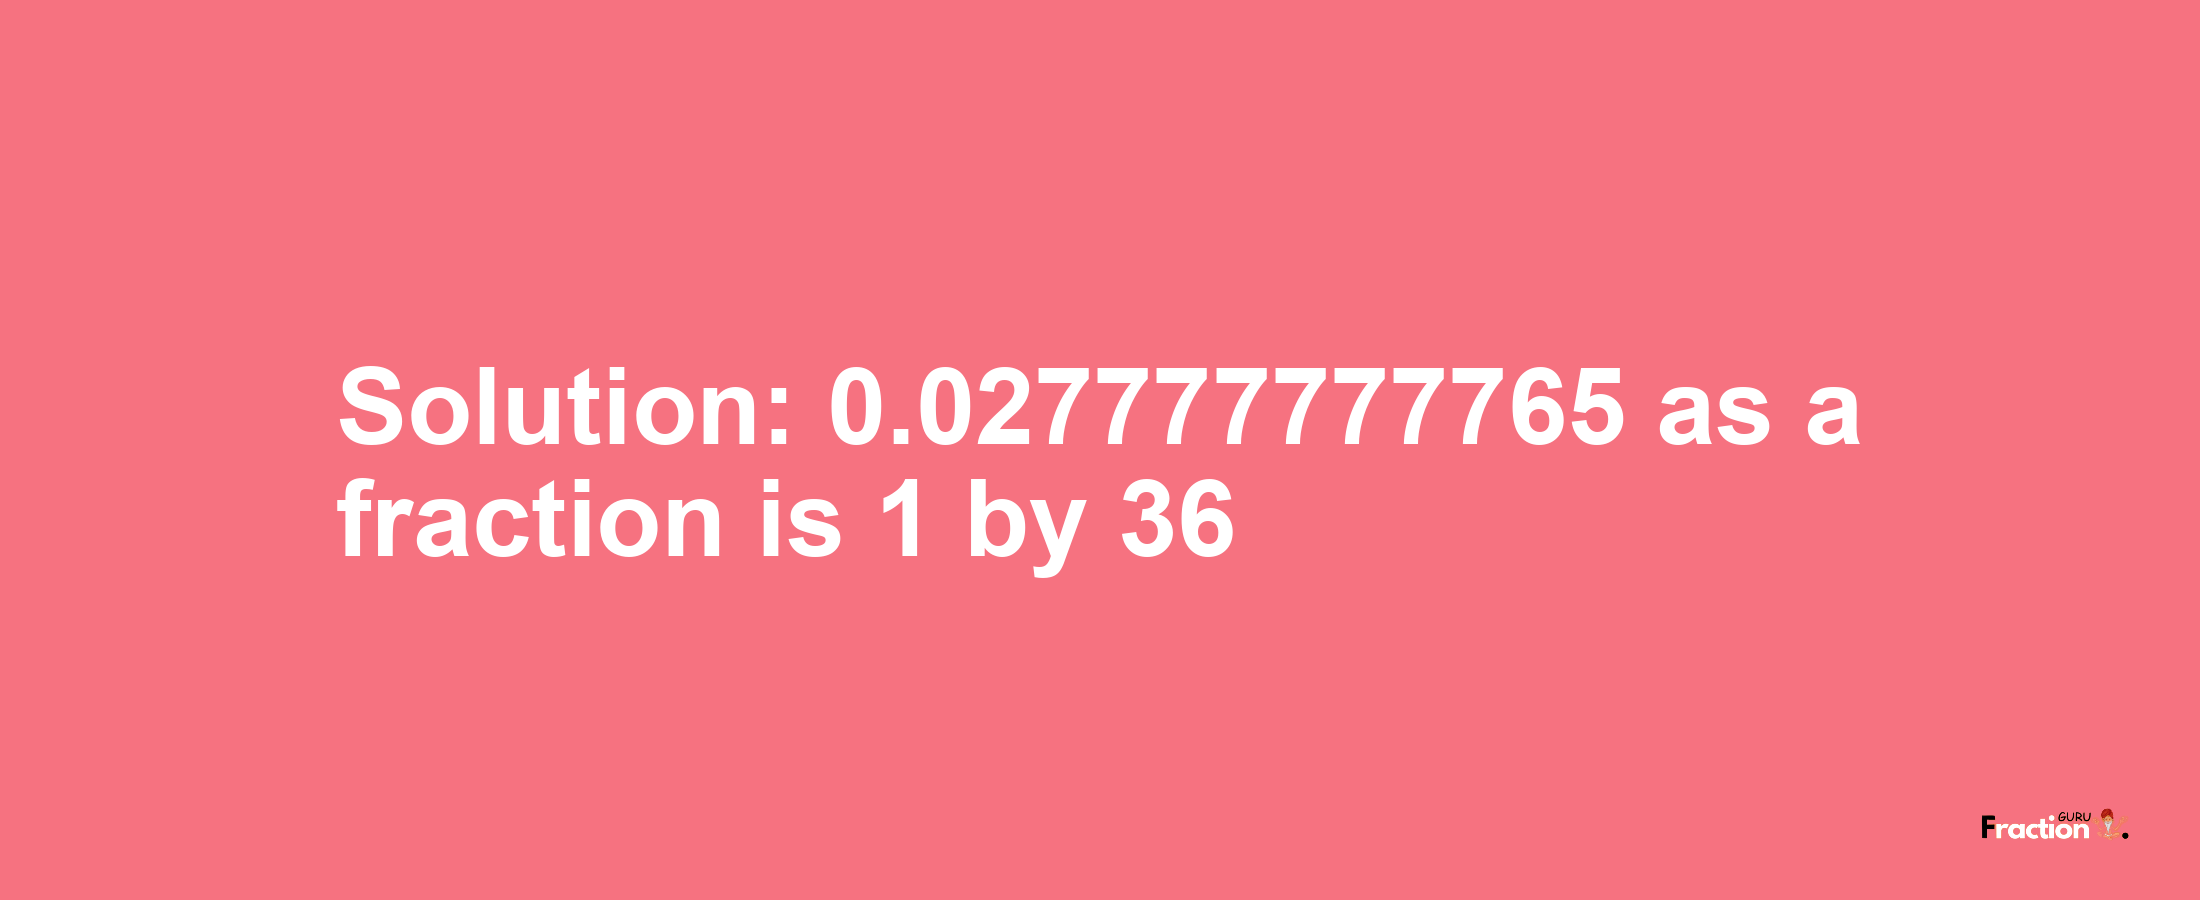 Solution:0.027777777765 as a fraction is 1/36